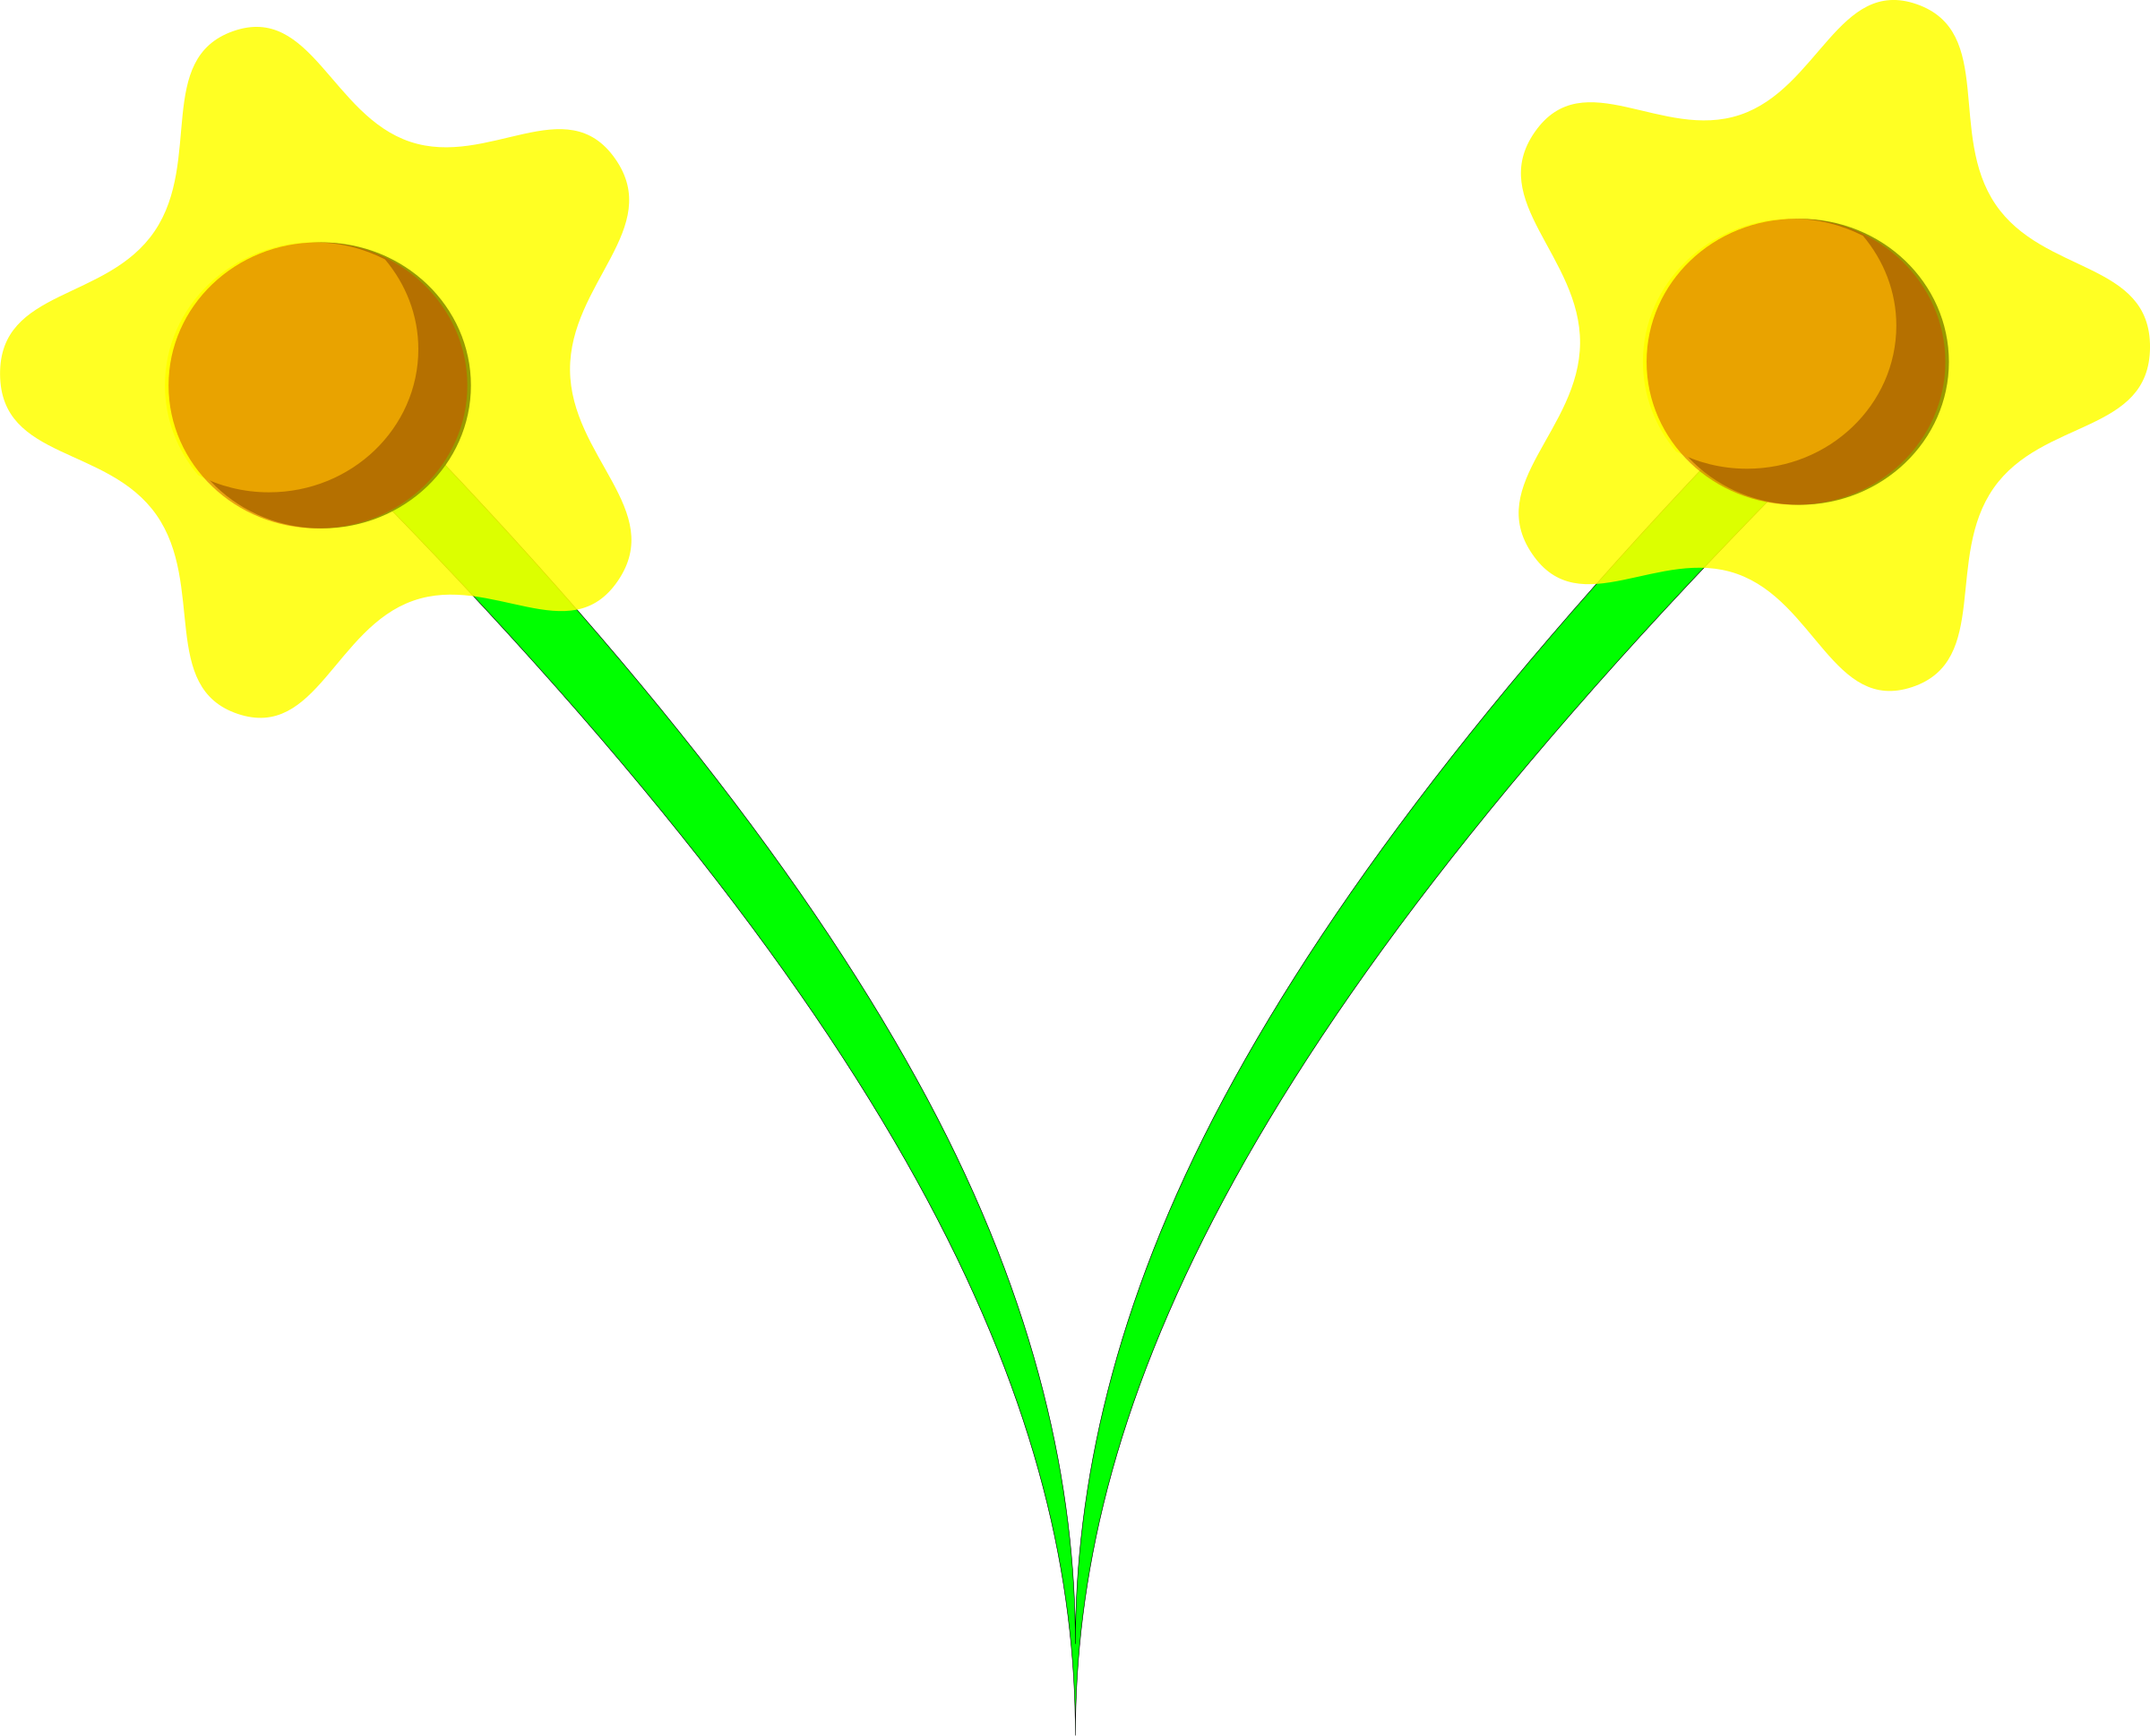 Big image png. Daffodil clipart simple flower